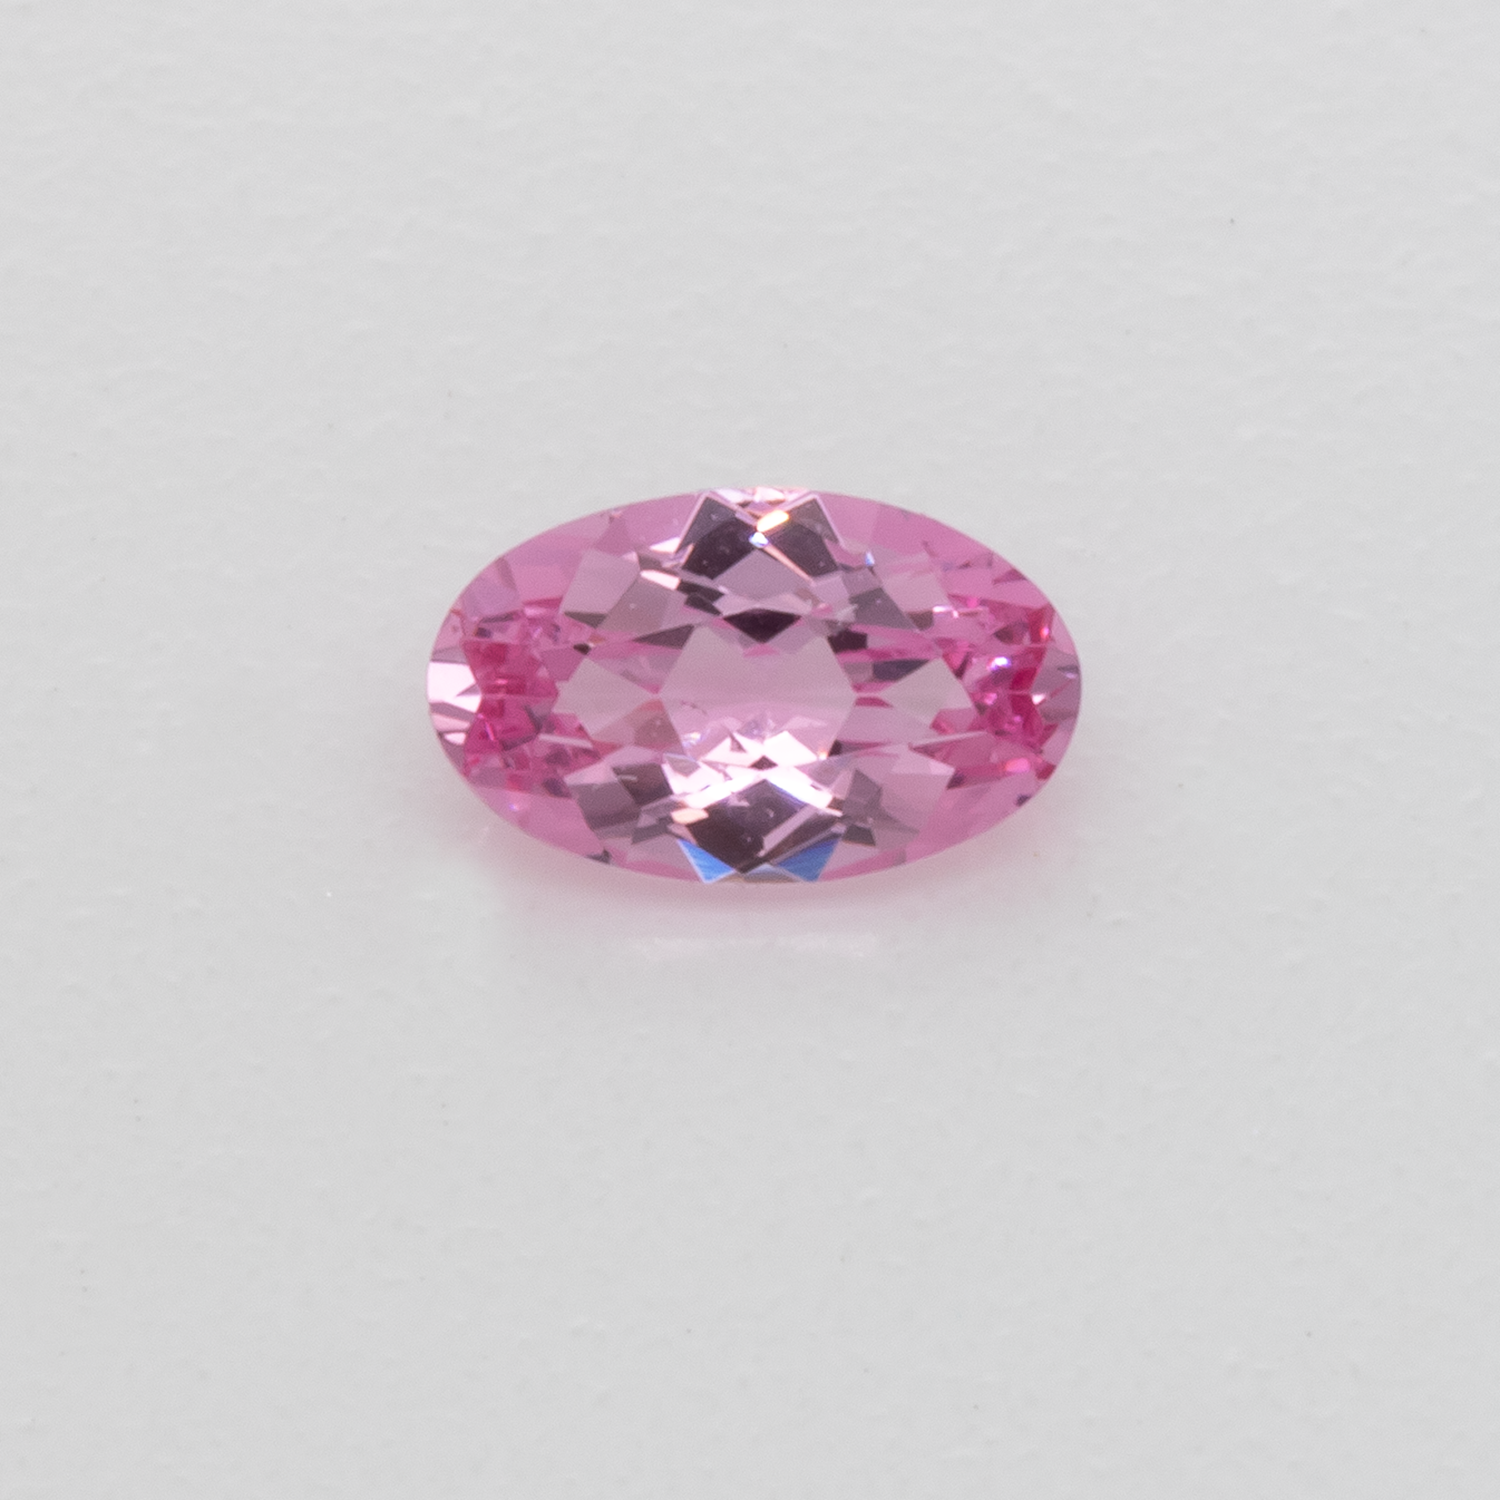 Spinell - rosa, oval, 5x3 mm, 0,25 cts, Nr. SP90026